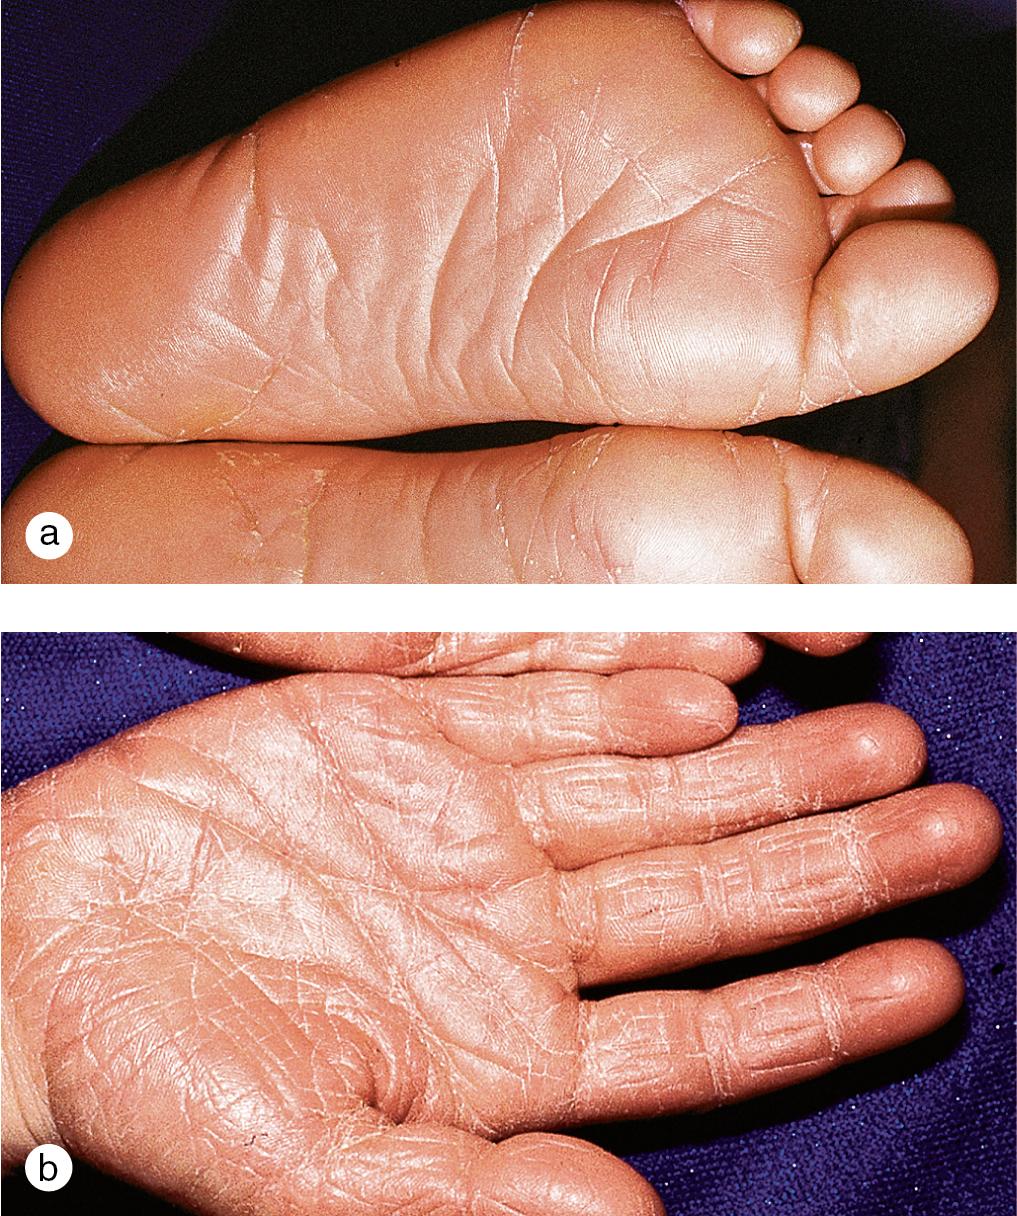 Fig. 3.8, Pityriasis rubra pilaris. This child developed a salmon-colored keratoderma of the (a) soles and (b) palms.